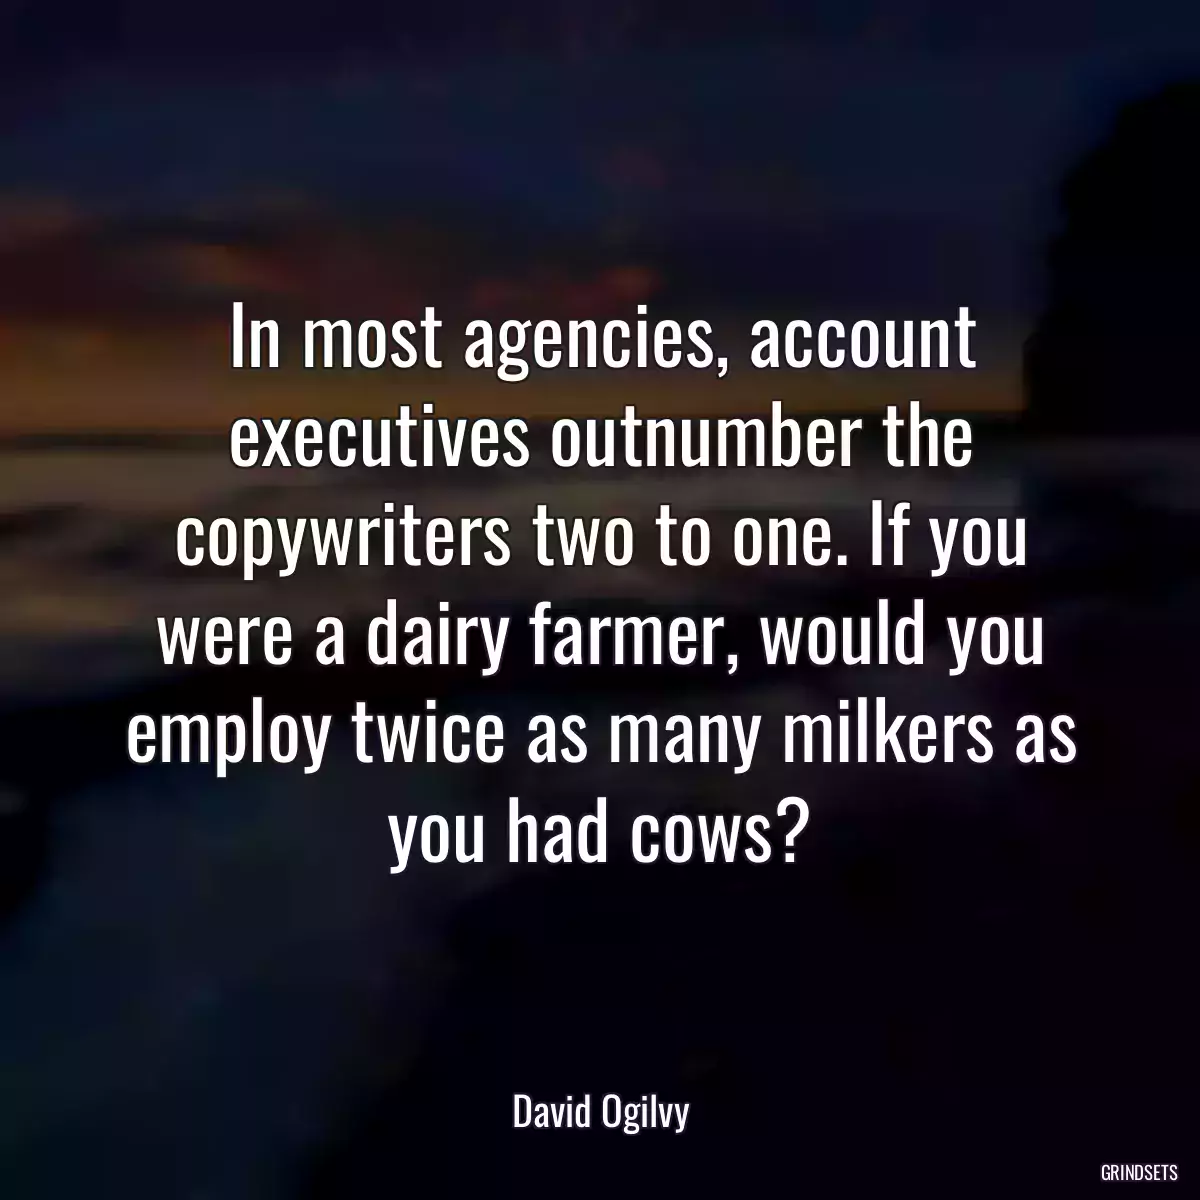 In most agencies, account executives outnumber the copywriters two to one. If you were a dairy farmer, would you employ twice as many milkers as you had cows?